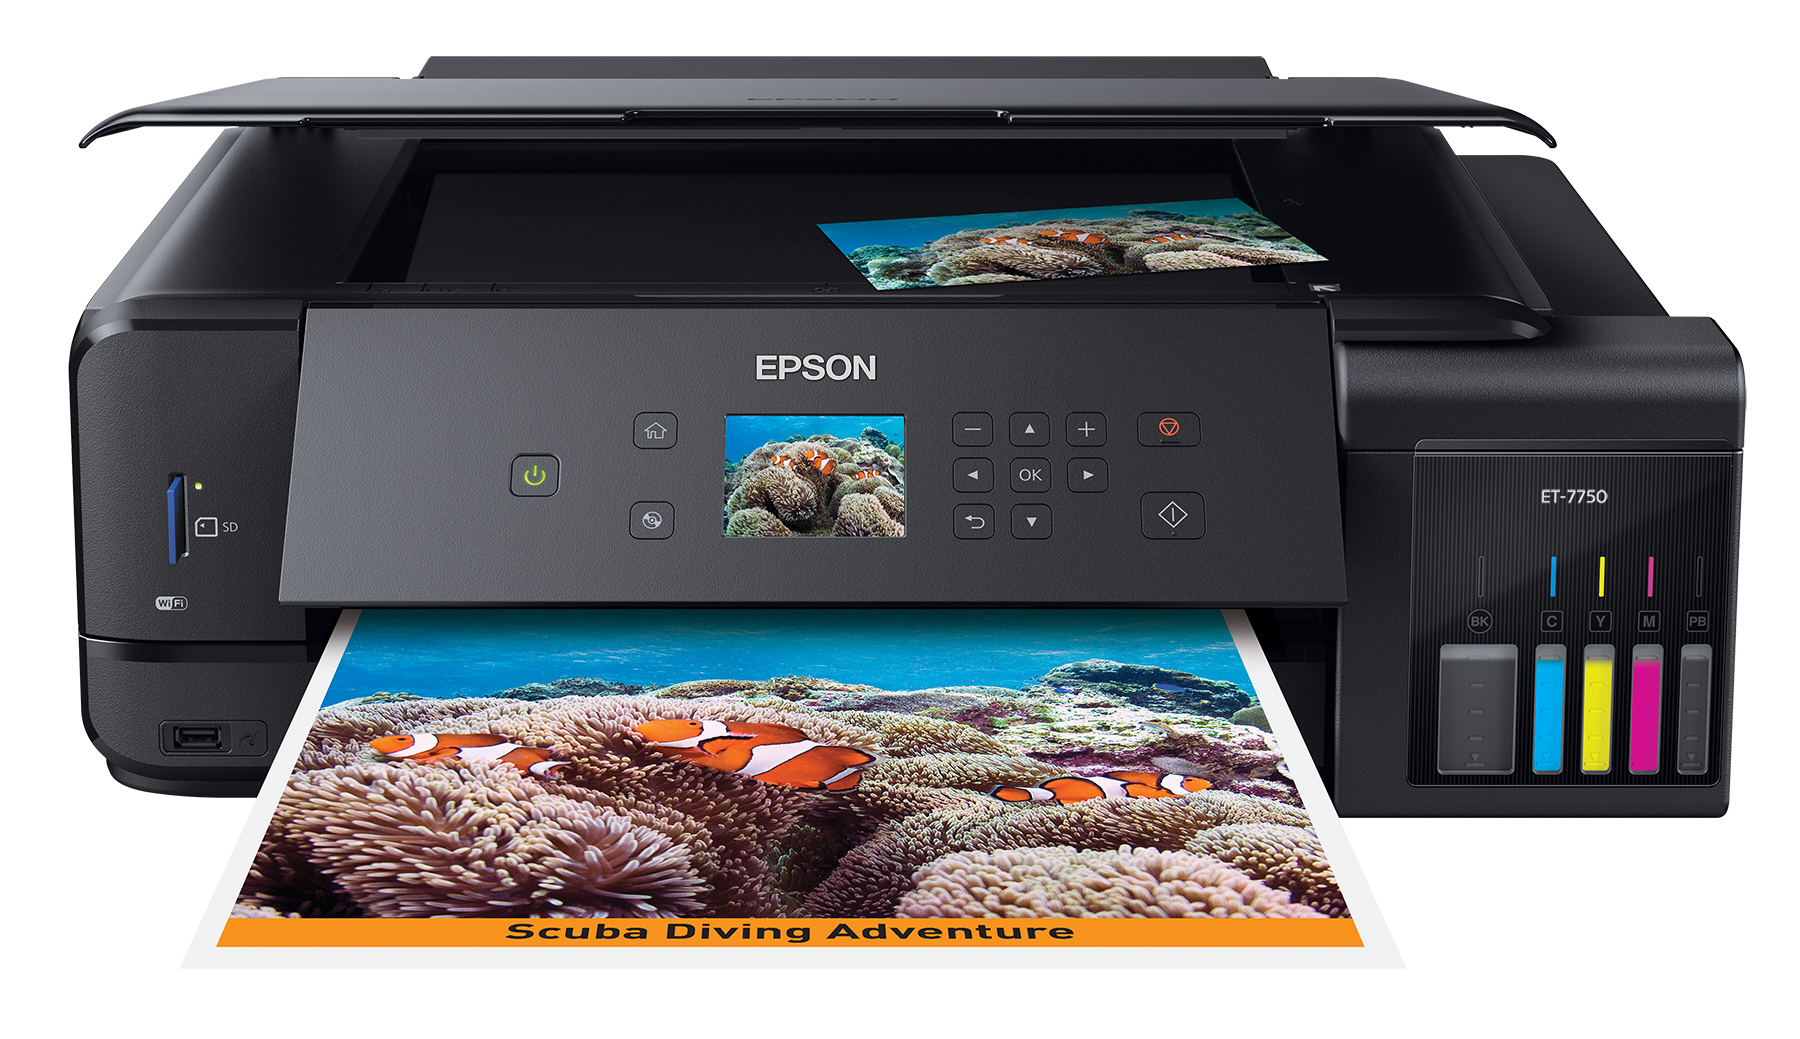 The Epson Expression Premium ET-7750 EcoTank wide-format all-in-one offers cartridge-free printing with a new 5-color ink system, perfect for photo printing.